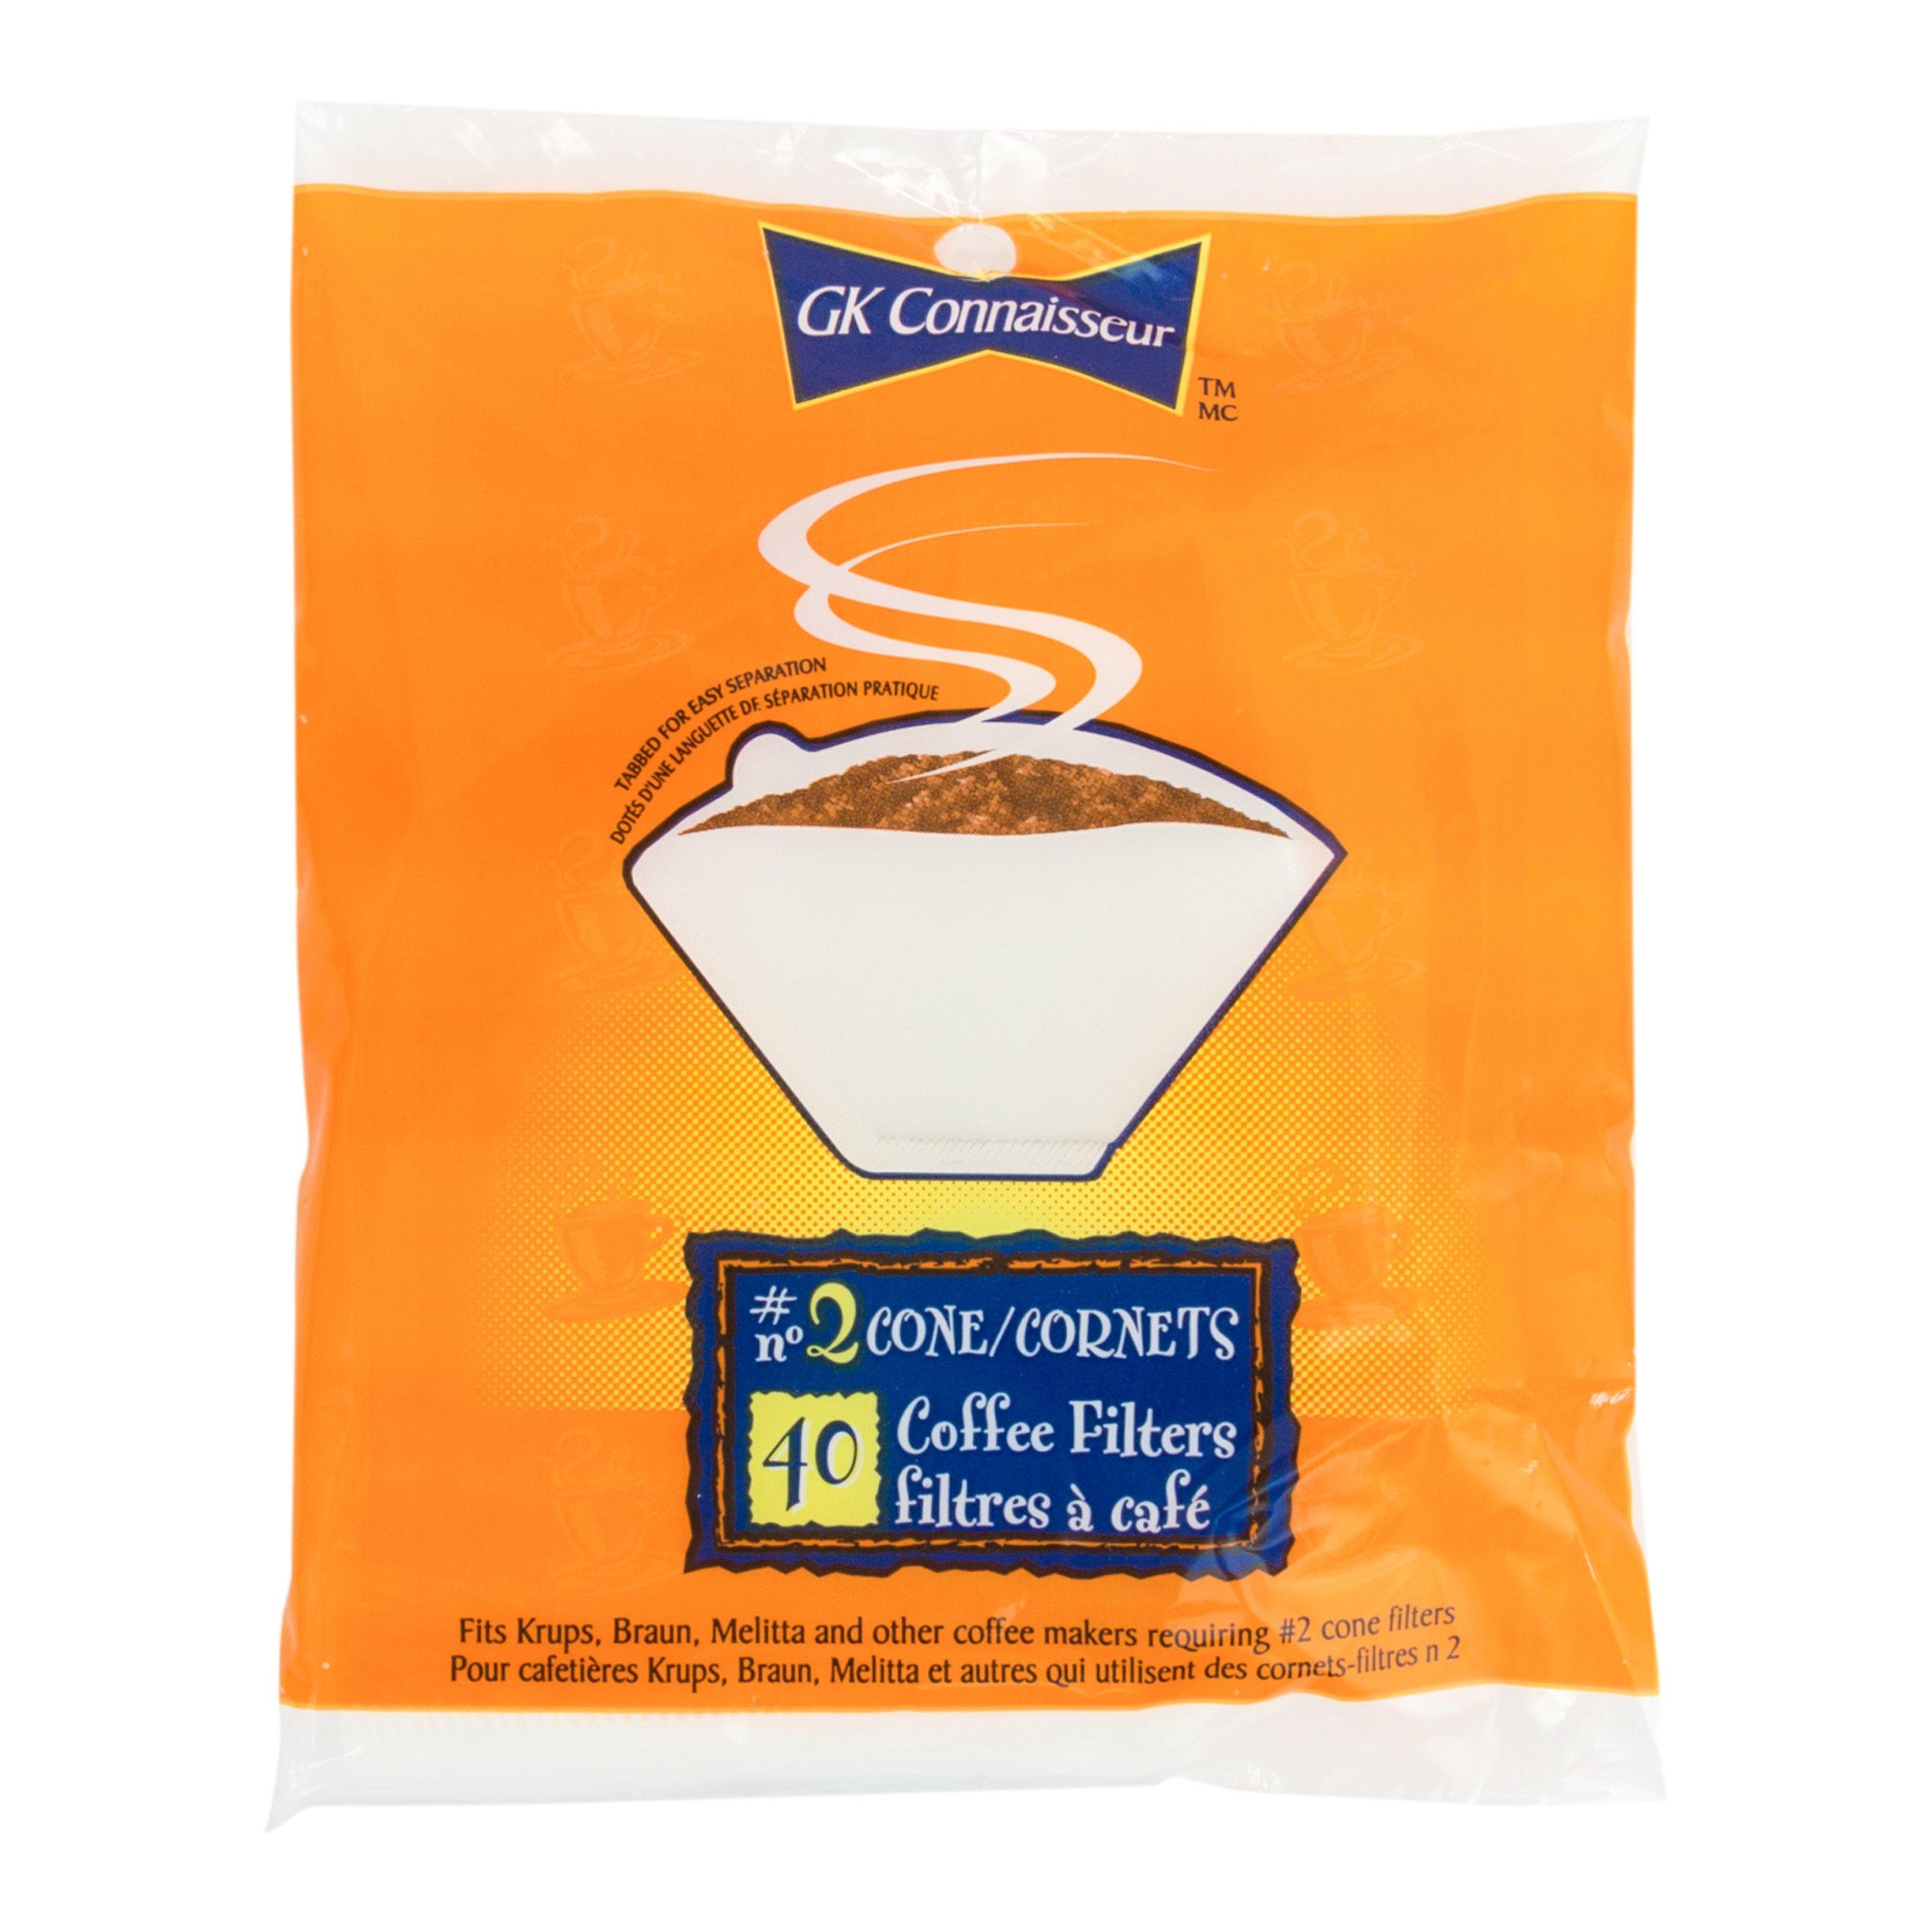 40 Coffee Filters In Poly Bag. Fits Most Coffee Machines Requiring #2 Cone Filters - Dollar Max Dépôt